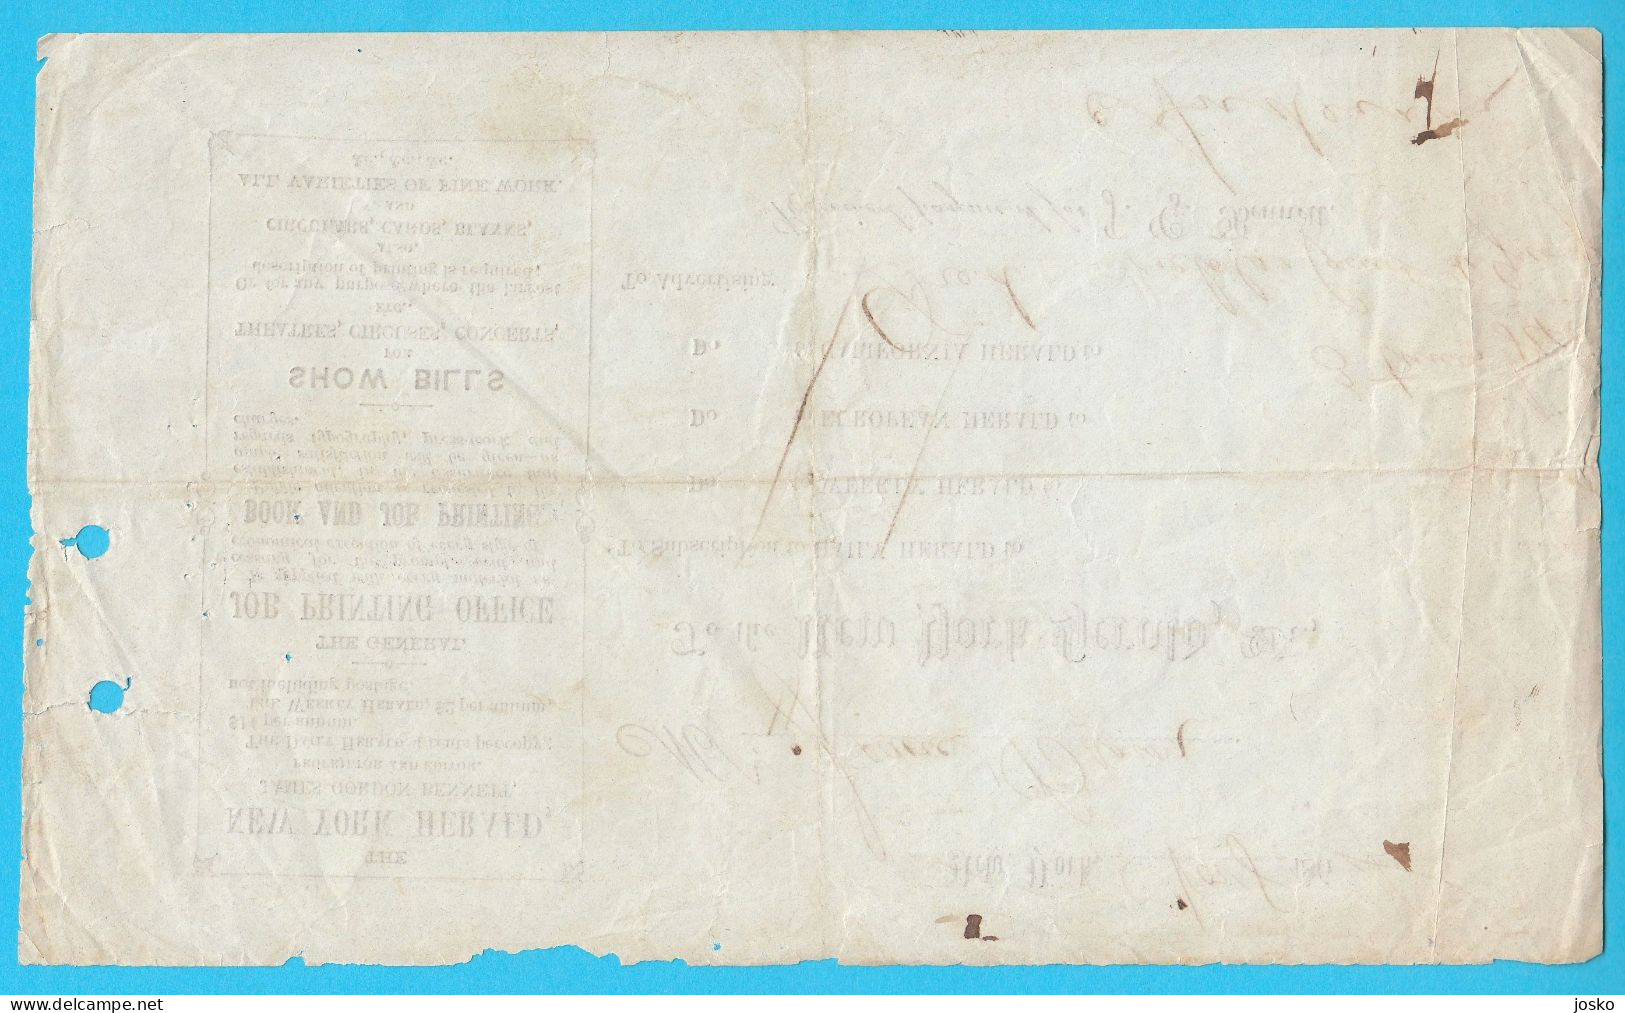 1864 Advertising Payment THE NEW YORK HERALD - Original Vintage Payment Receipt * USA United States Of America - Verenigde Staten